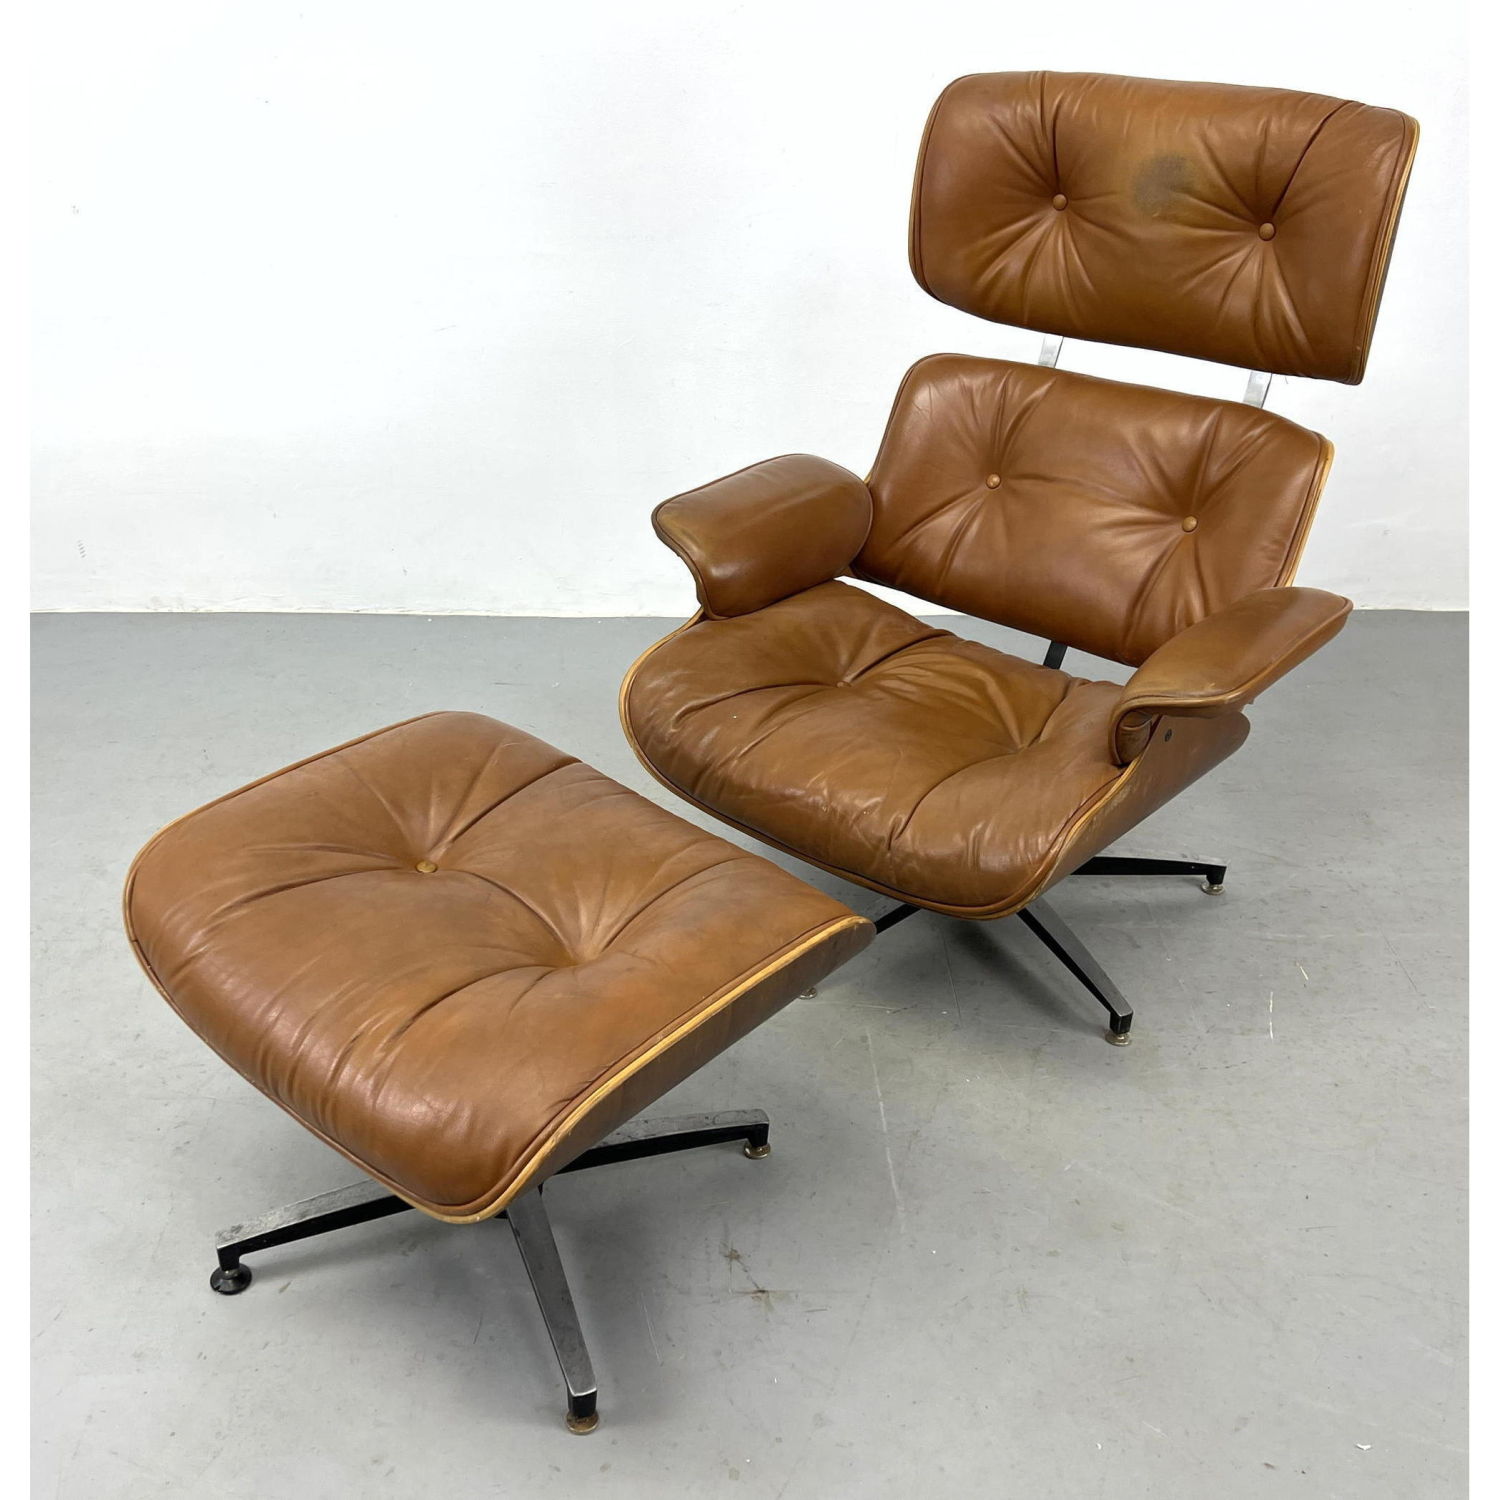 Eames Style Lounge Chair and Ottoman  2ff367